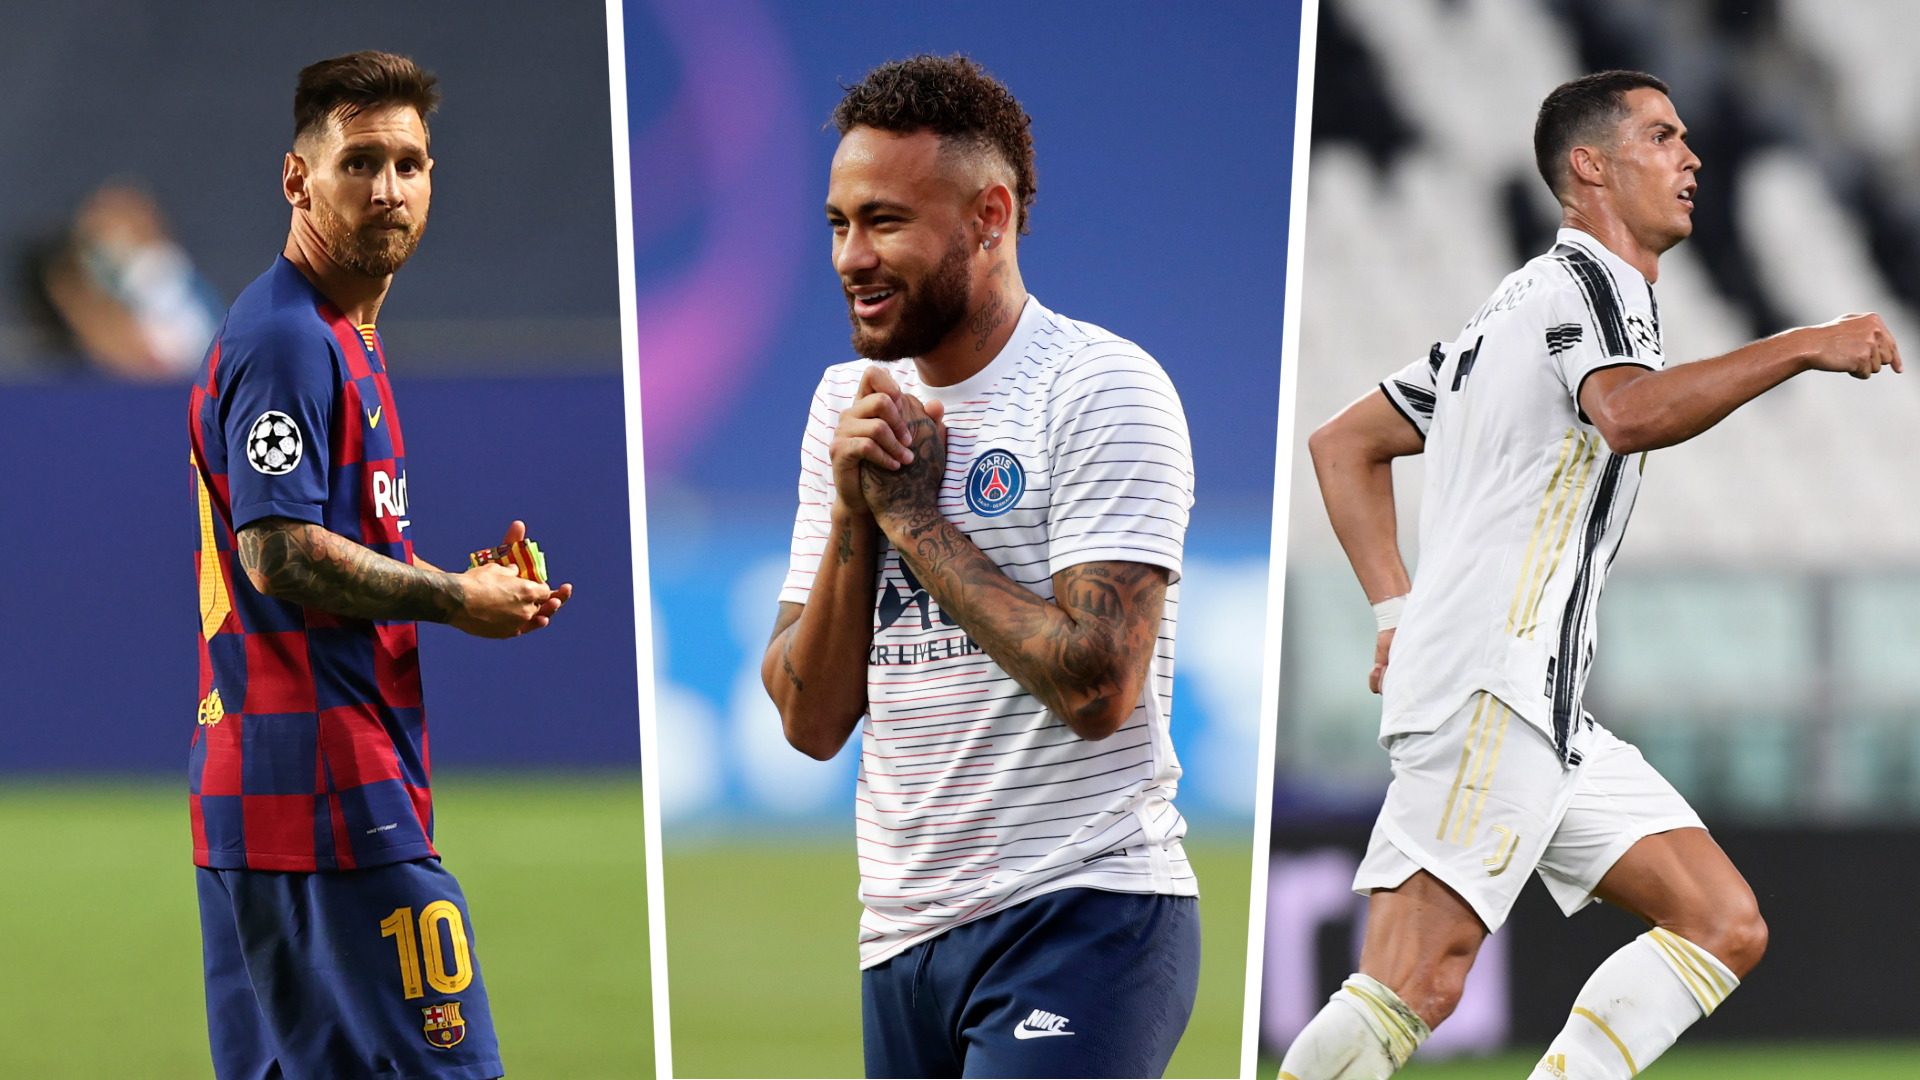 Neymar aiming for Ballon d'Or as he admits Messi and Ronaldo are 'not from this planet'